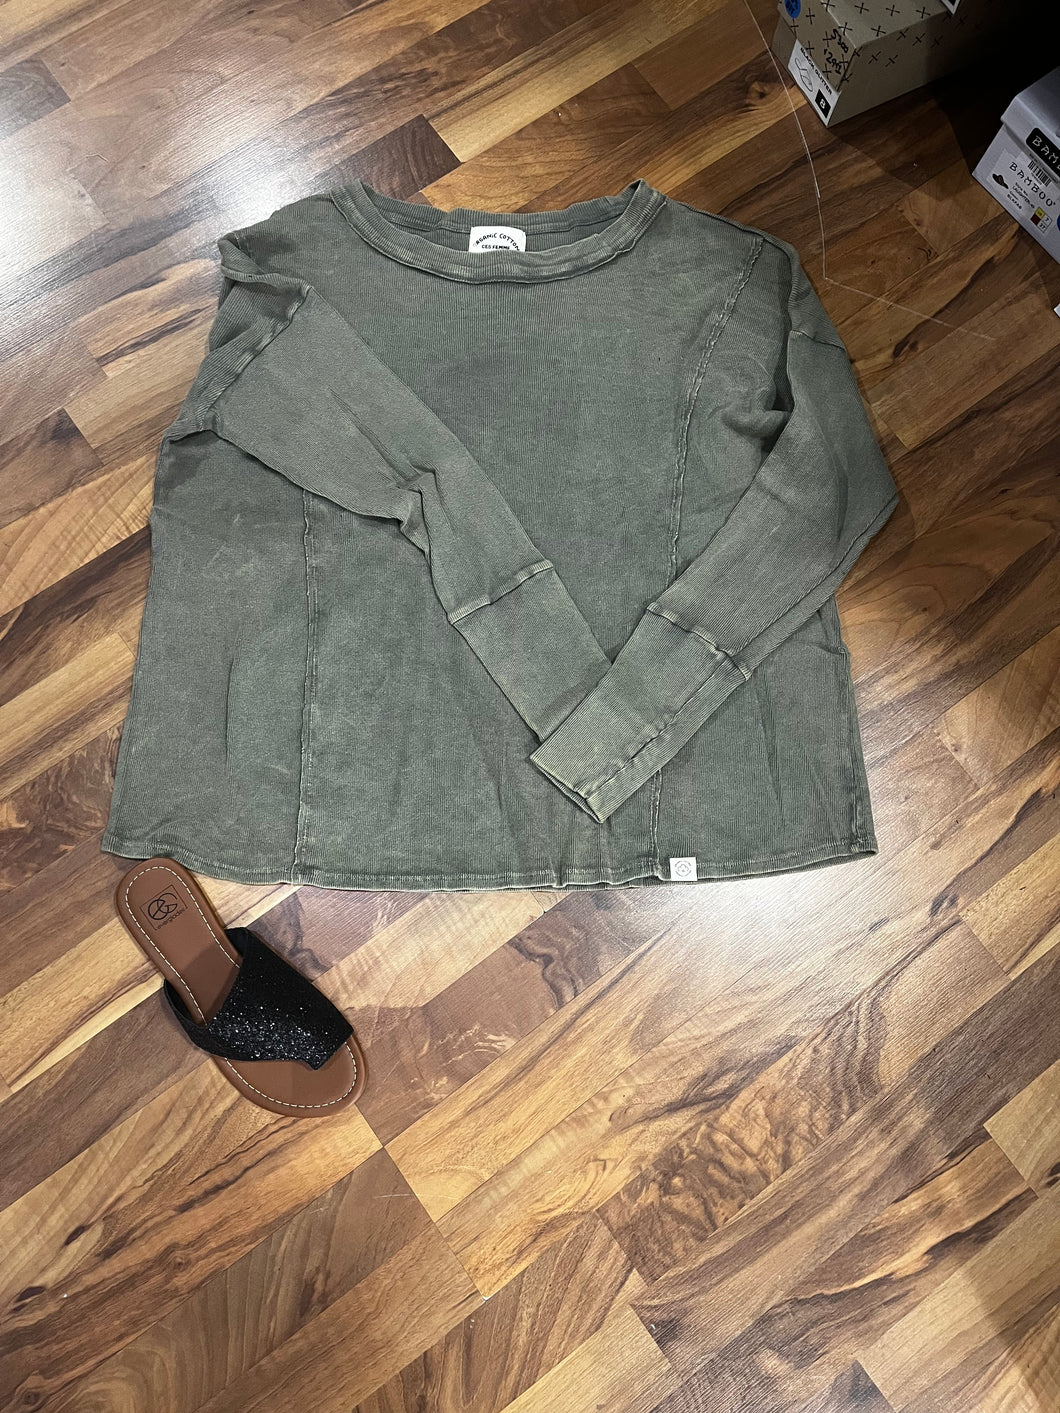 Olive Mineral Wash Long Sleeve Top 9/13/23 7025